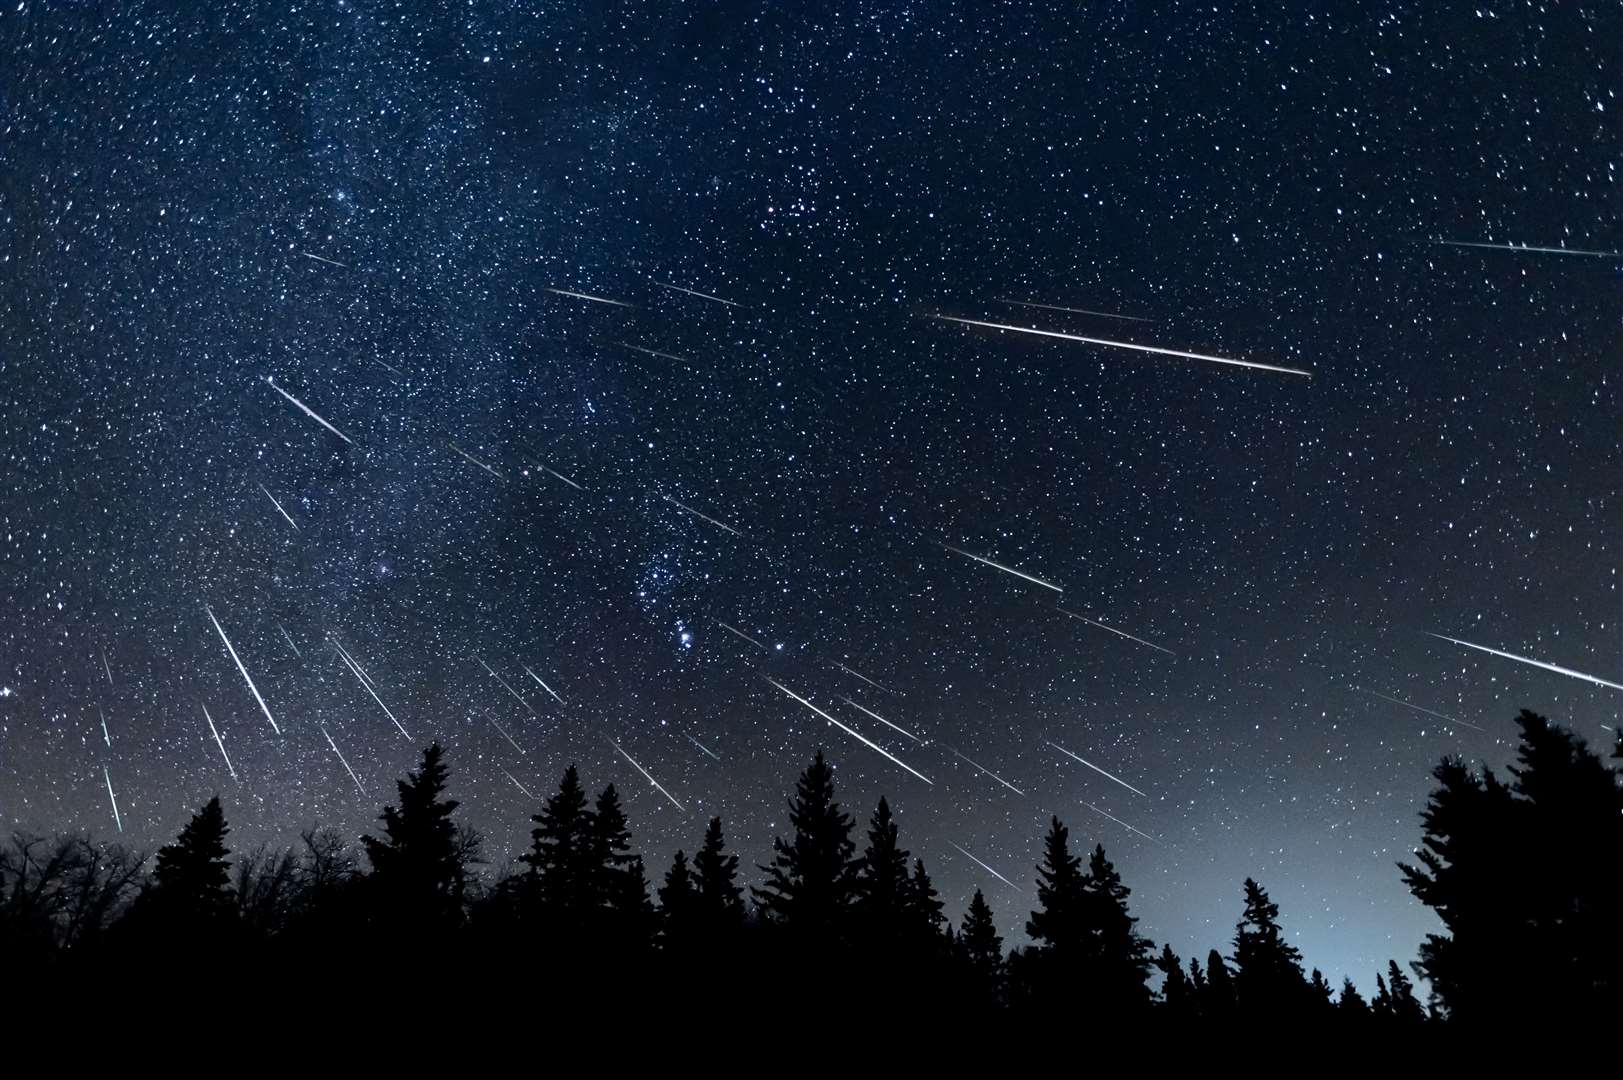 There are a number of meteor showers happening in 2023